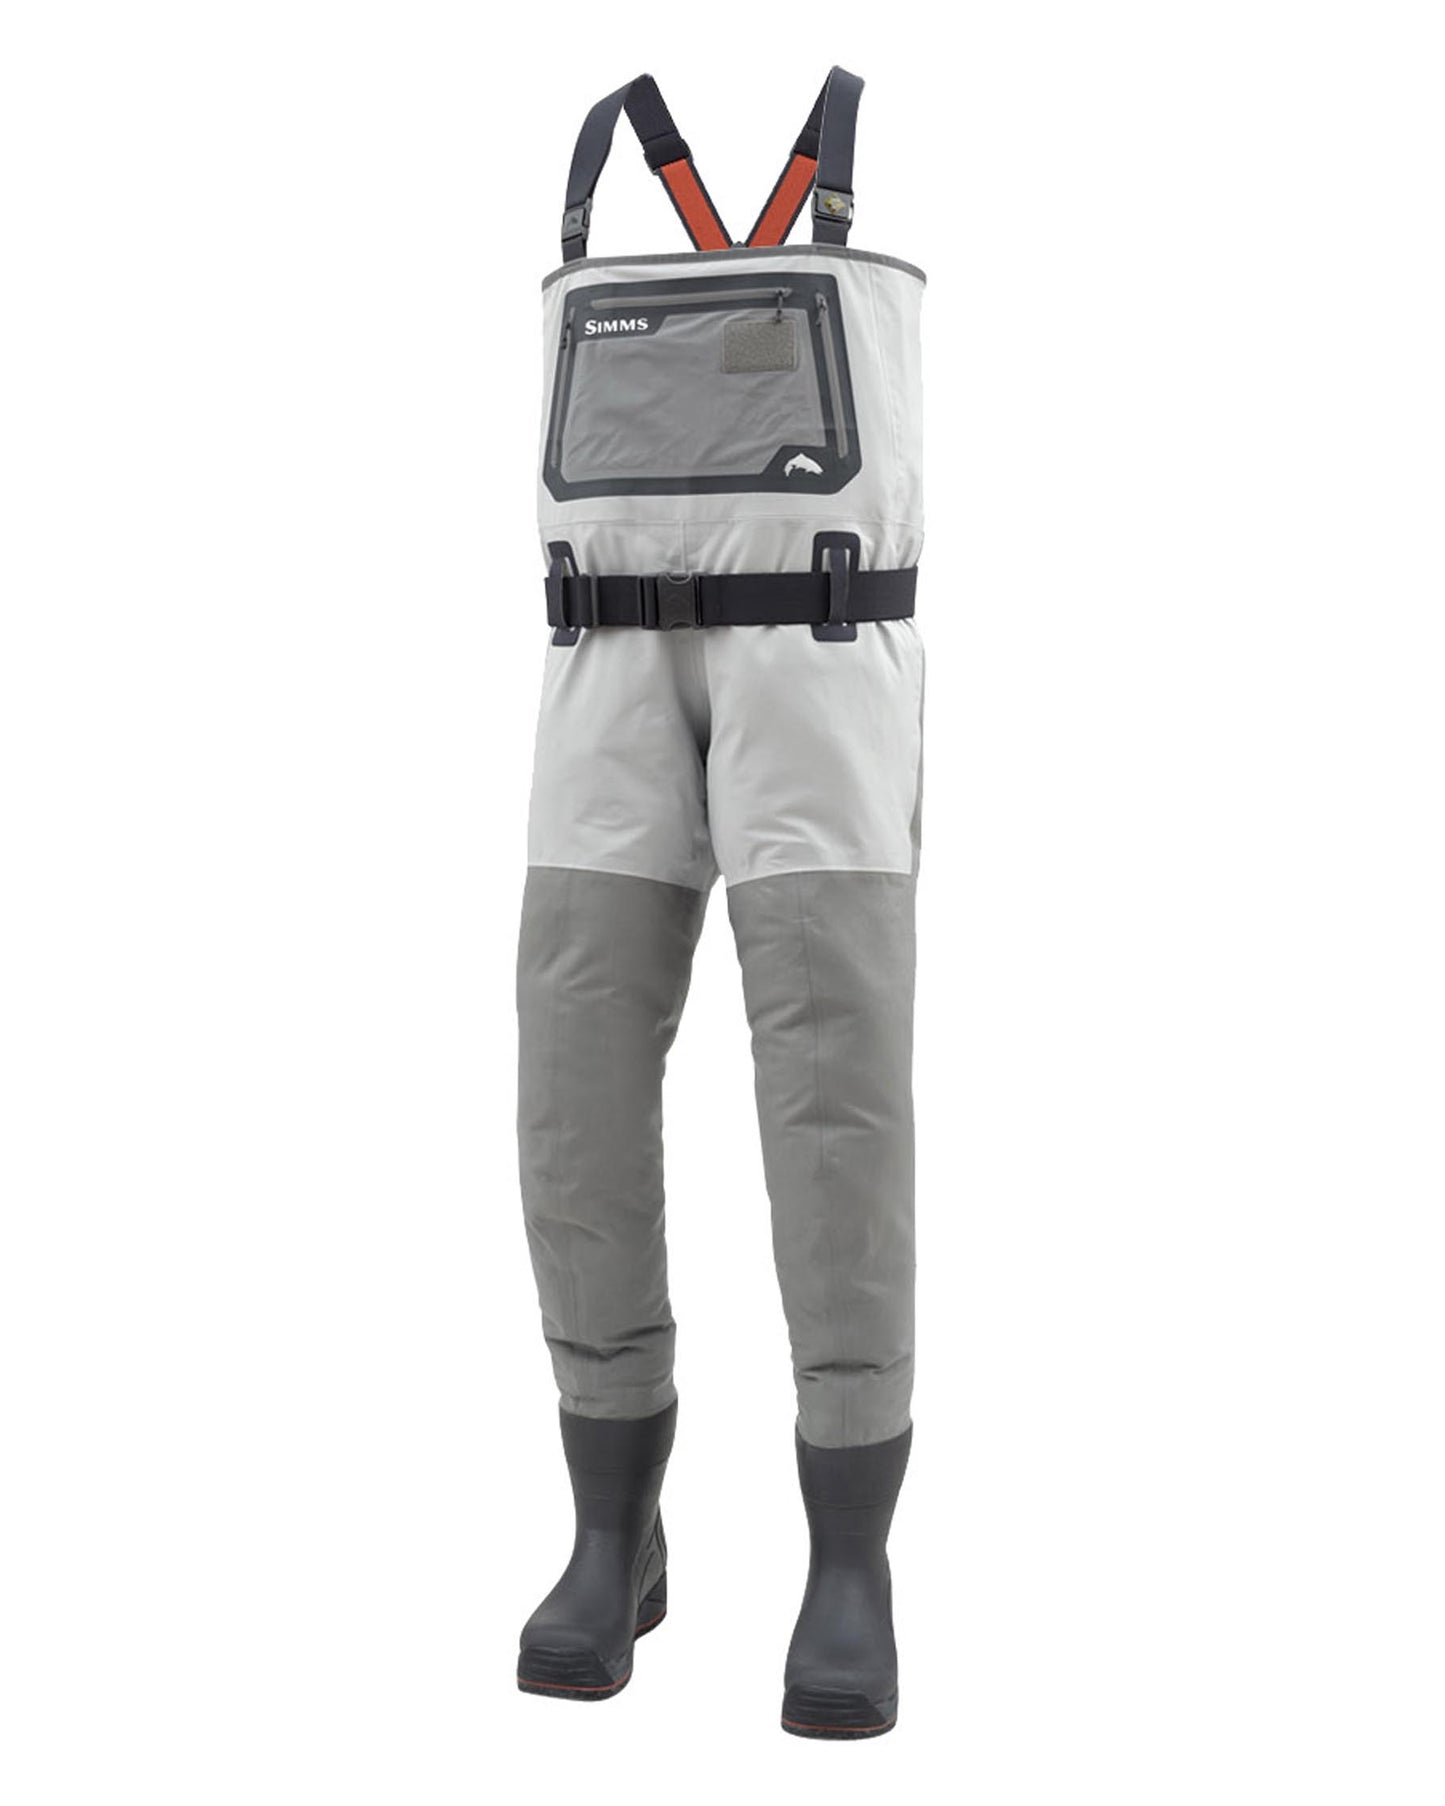 2021 M's G3 Guide Waders - Bootfoot - Felt Sole